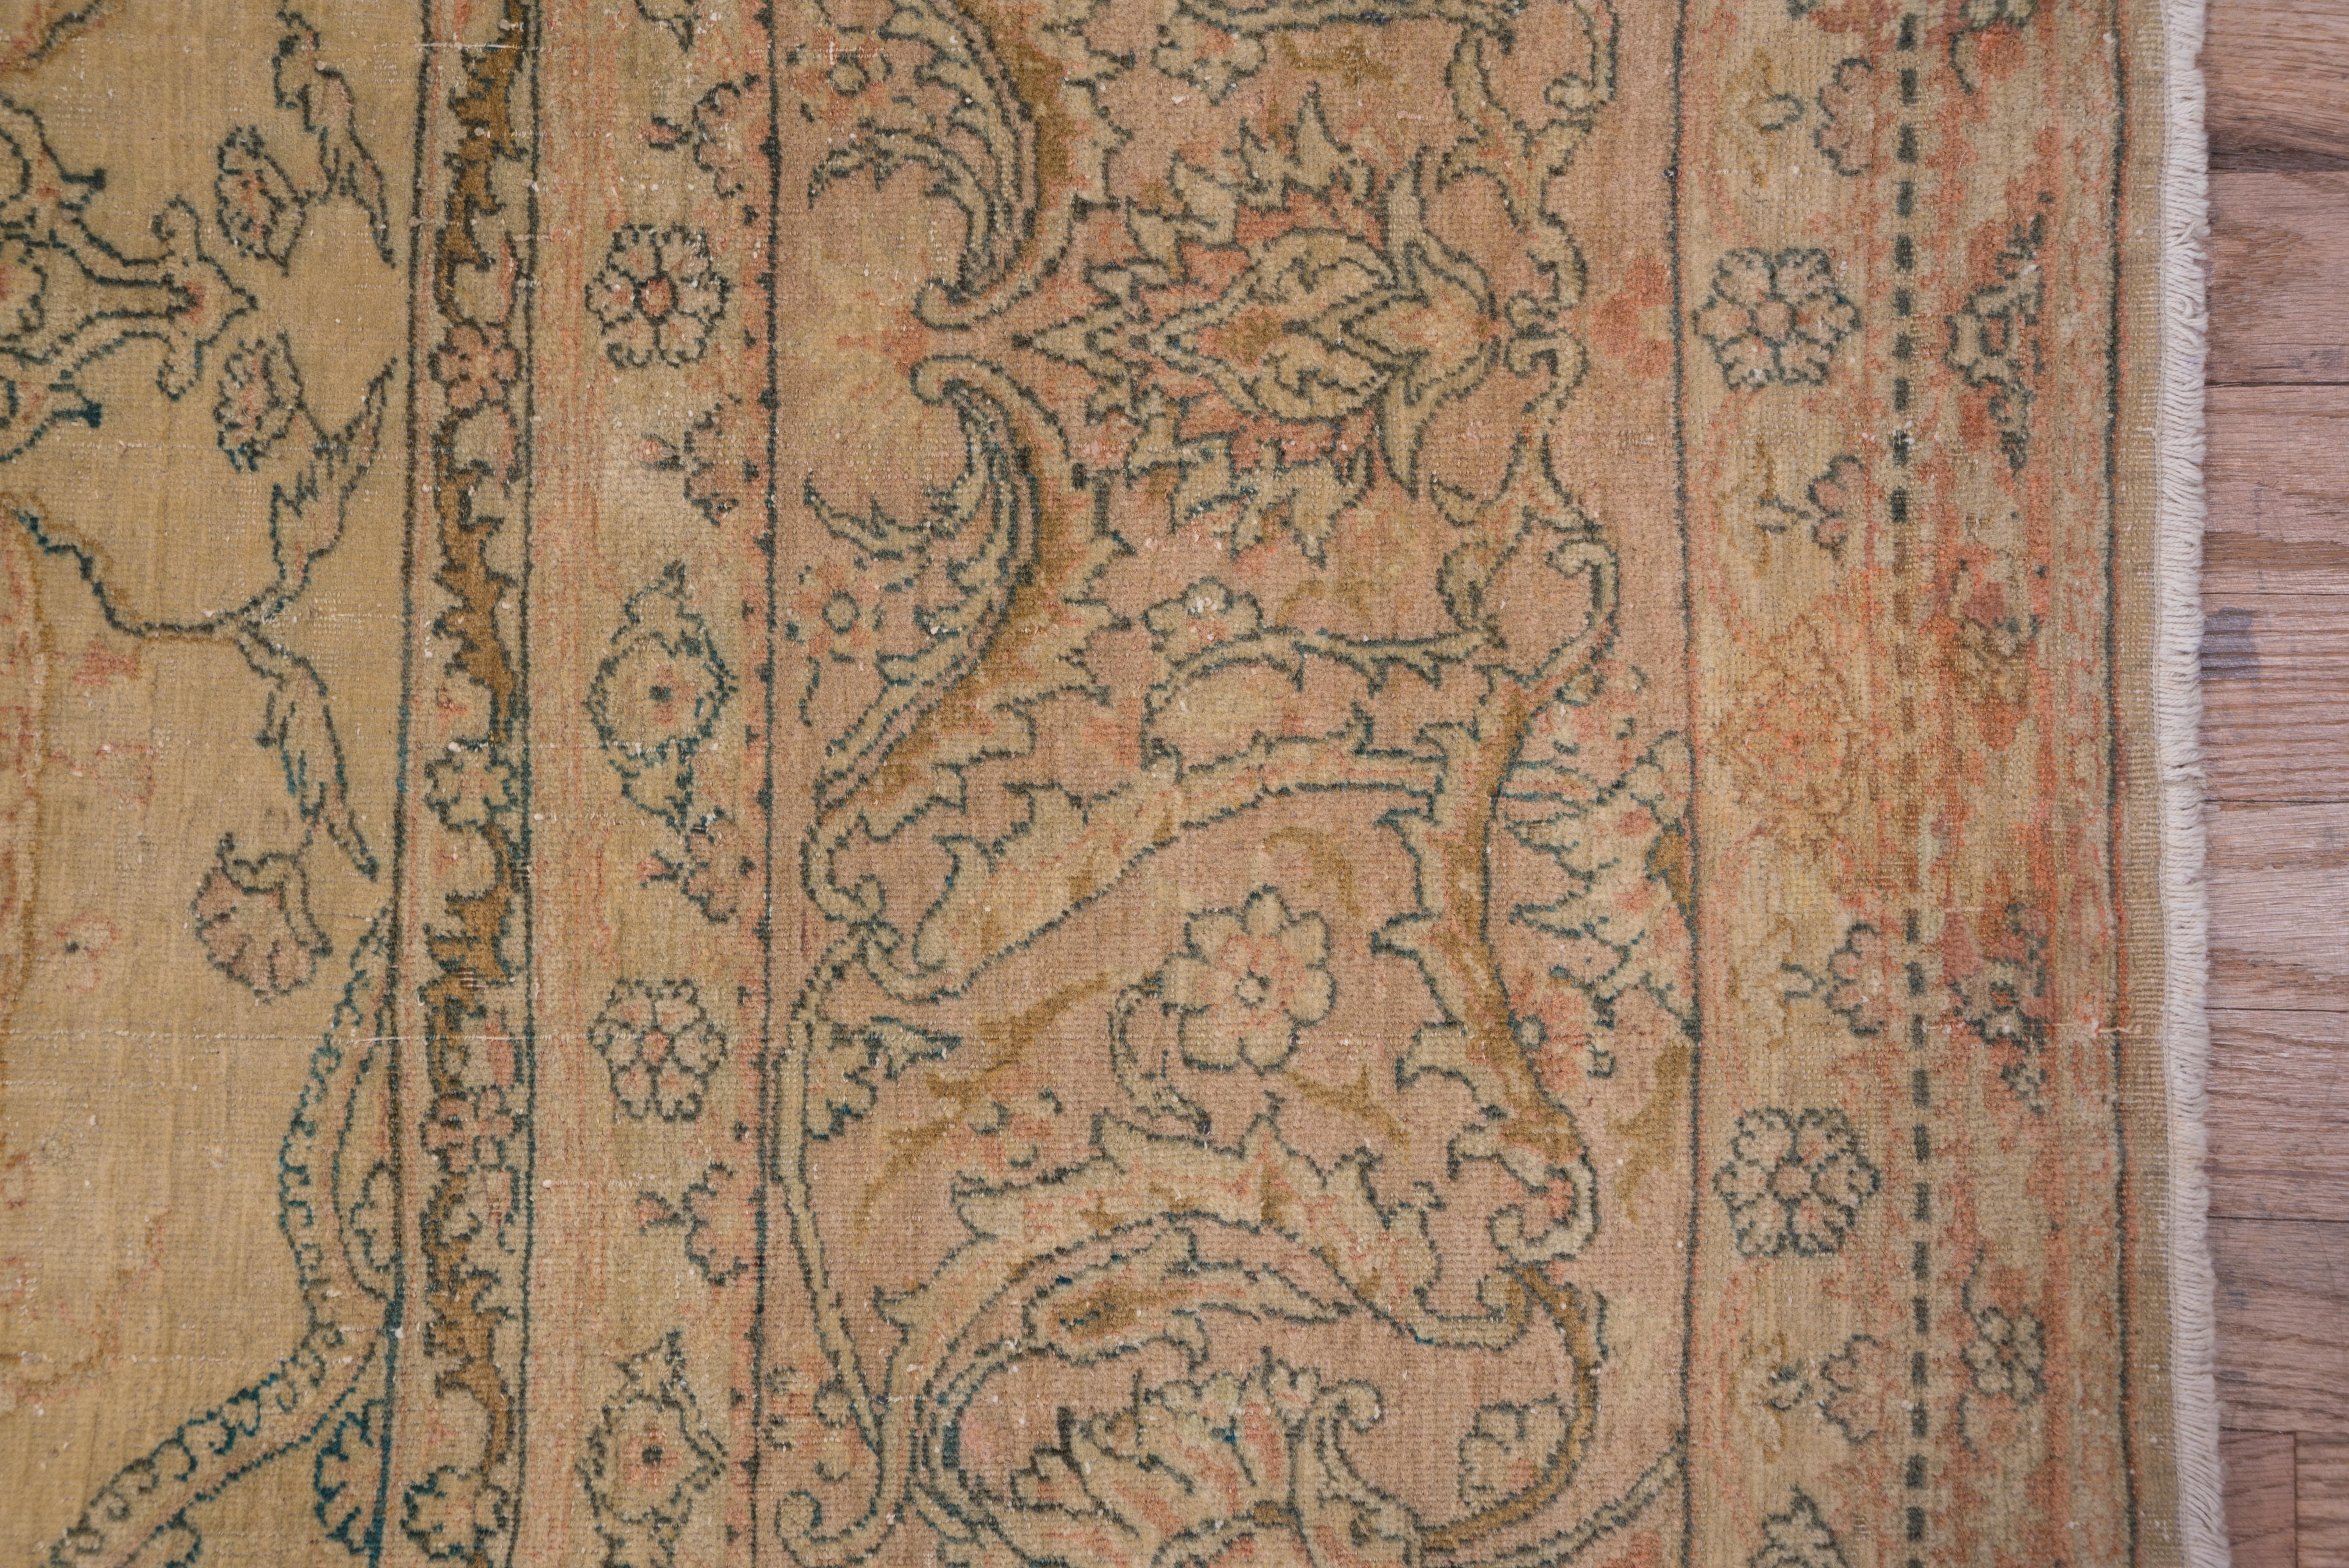 Wool Fine Antique Turkish Sivas Rug with Green Accents, Circa 1920s For Sale